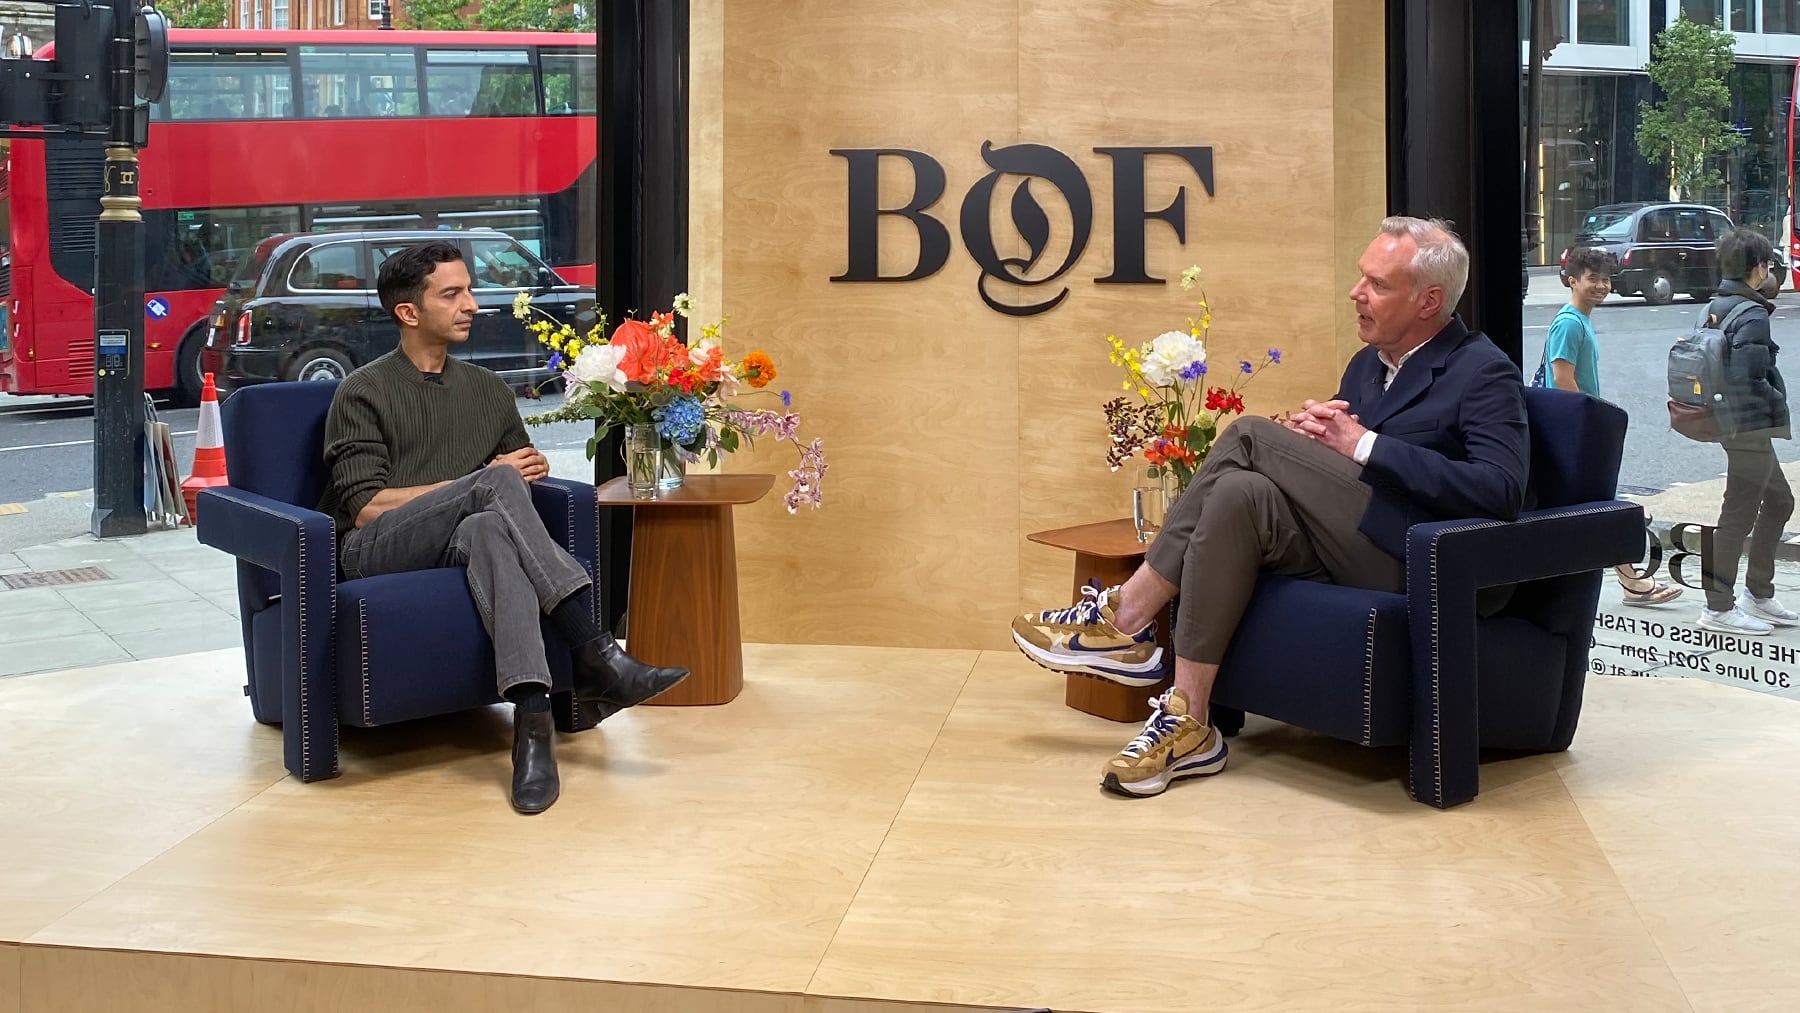 Imran Amed, founder & CEO of The Business of Fashion and Andrew Keith, Managing Director of Selfridges, at the BoF Professional Summit. BoF.